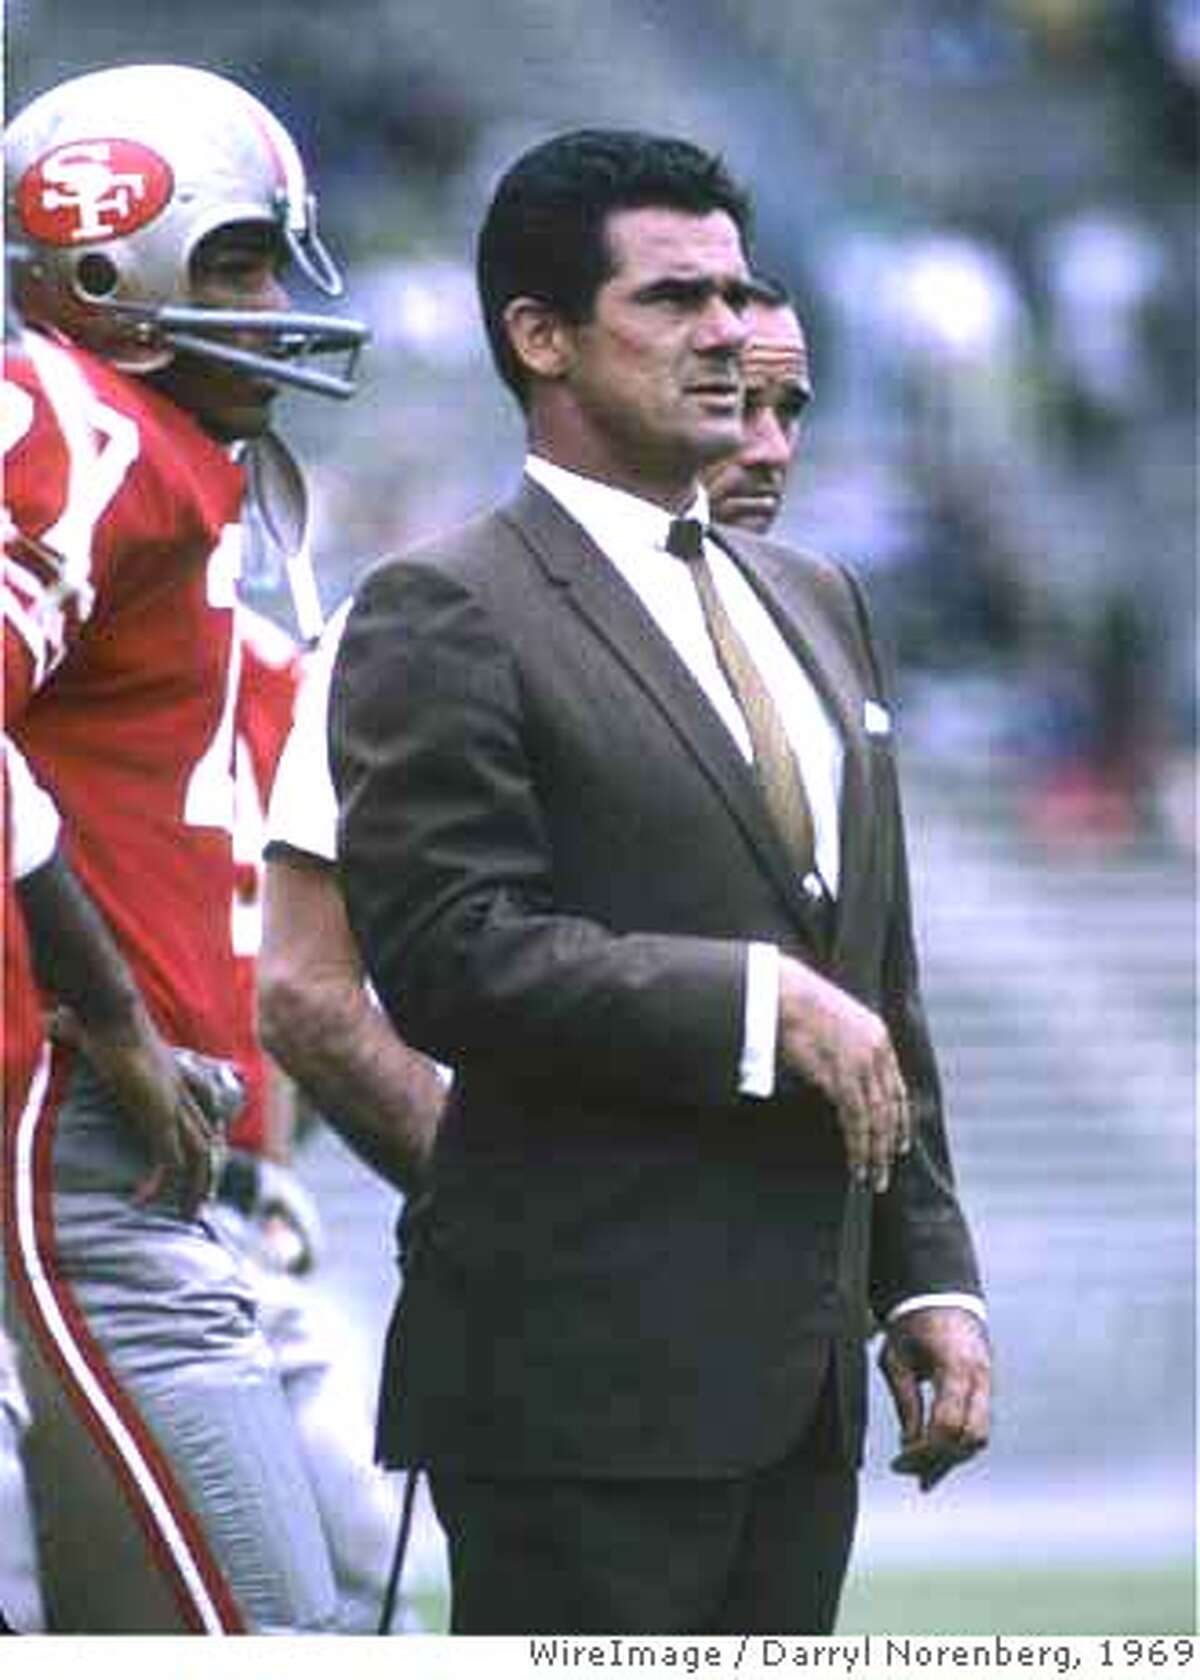 San Francisco 49ers head coach Dick Nolan during a 17-20 loss to the Dallas Cowboys on August 17, 1969 at Kezar Stadium in San Francisco, California. NFL Preseason - San Francisco 49ers vs Dallas Cowboys - August 17, 1969 Kezar Stadium San Francisco, California United States August 17, 1969 Photo by Darryl Norenberg/WireImage (Newscom TagID: winfl179059) [Photo via Newscom]